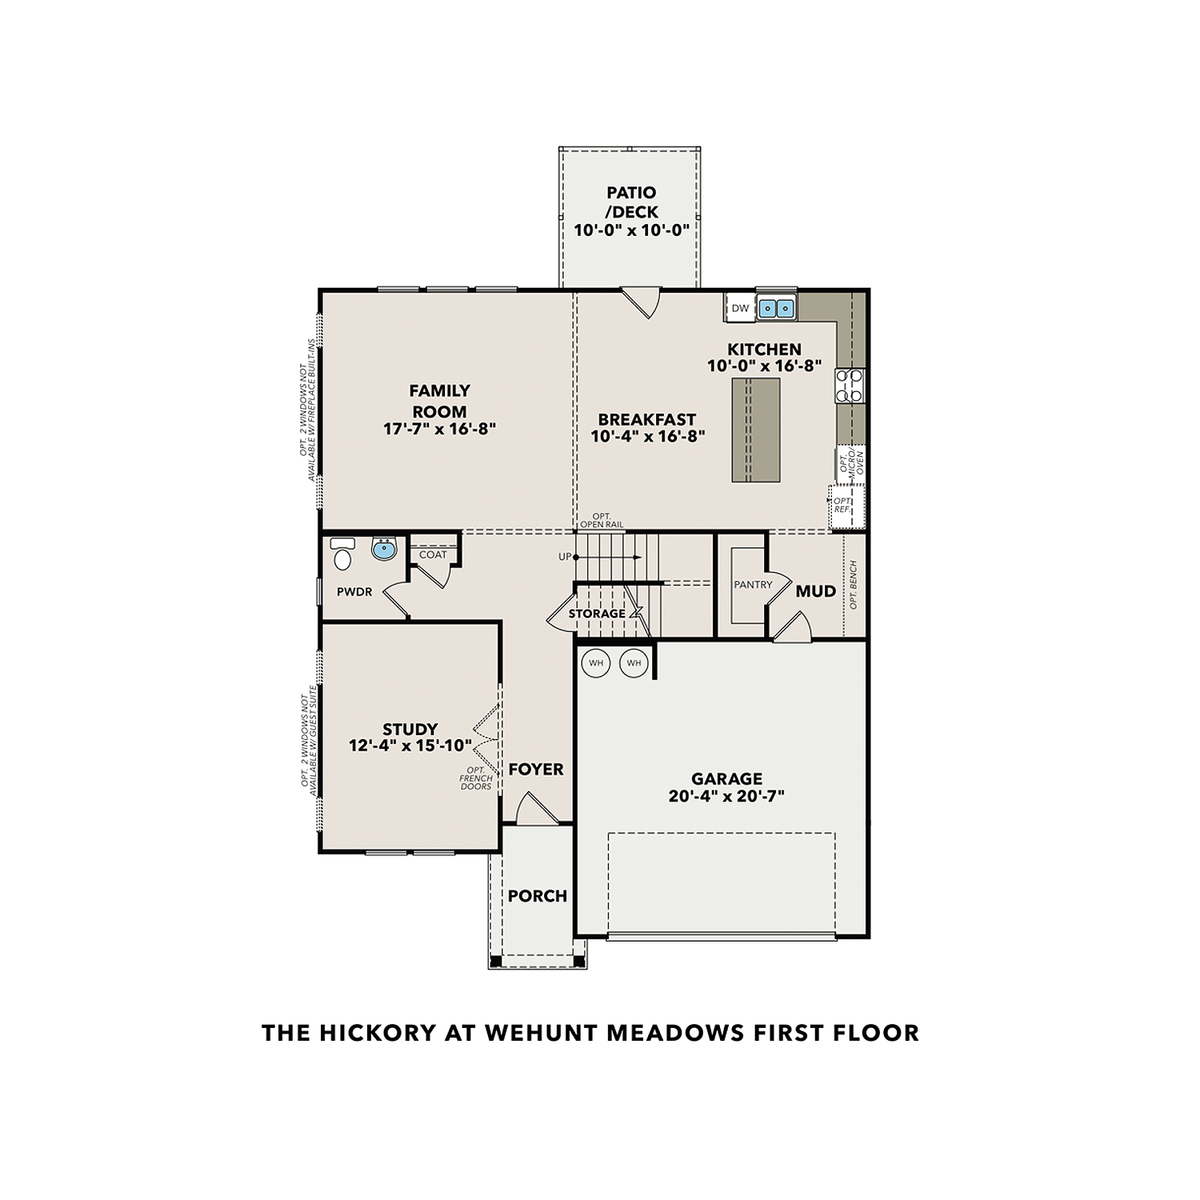 1 - The Hickory C at Wehunt Meadows buildable floor plan layout in Davidson Homes' Wehunt Meadows community.